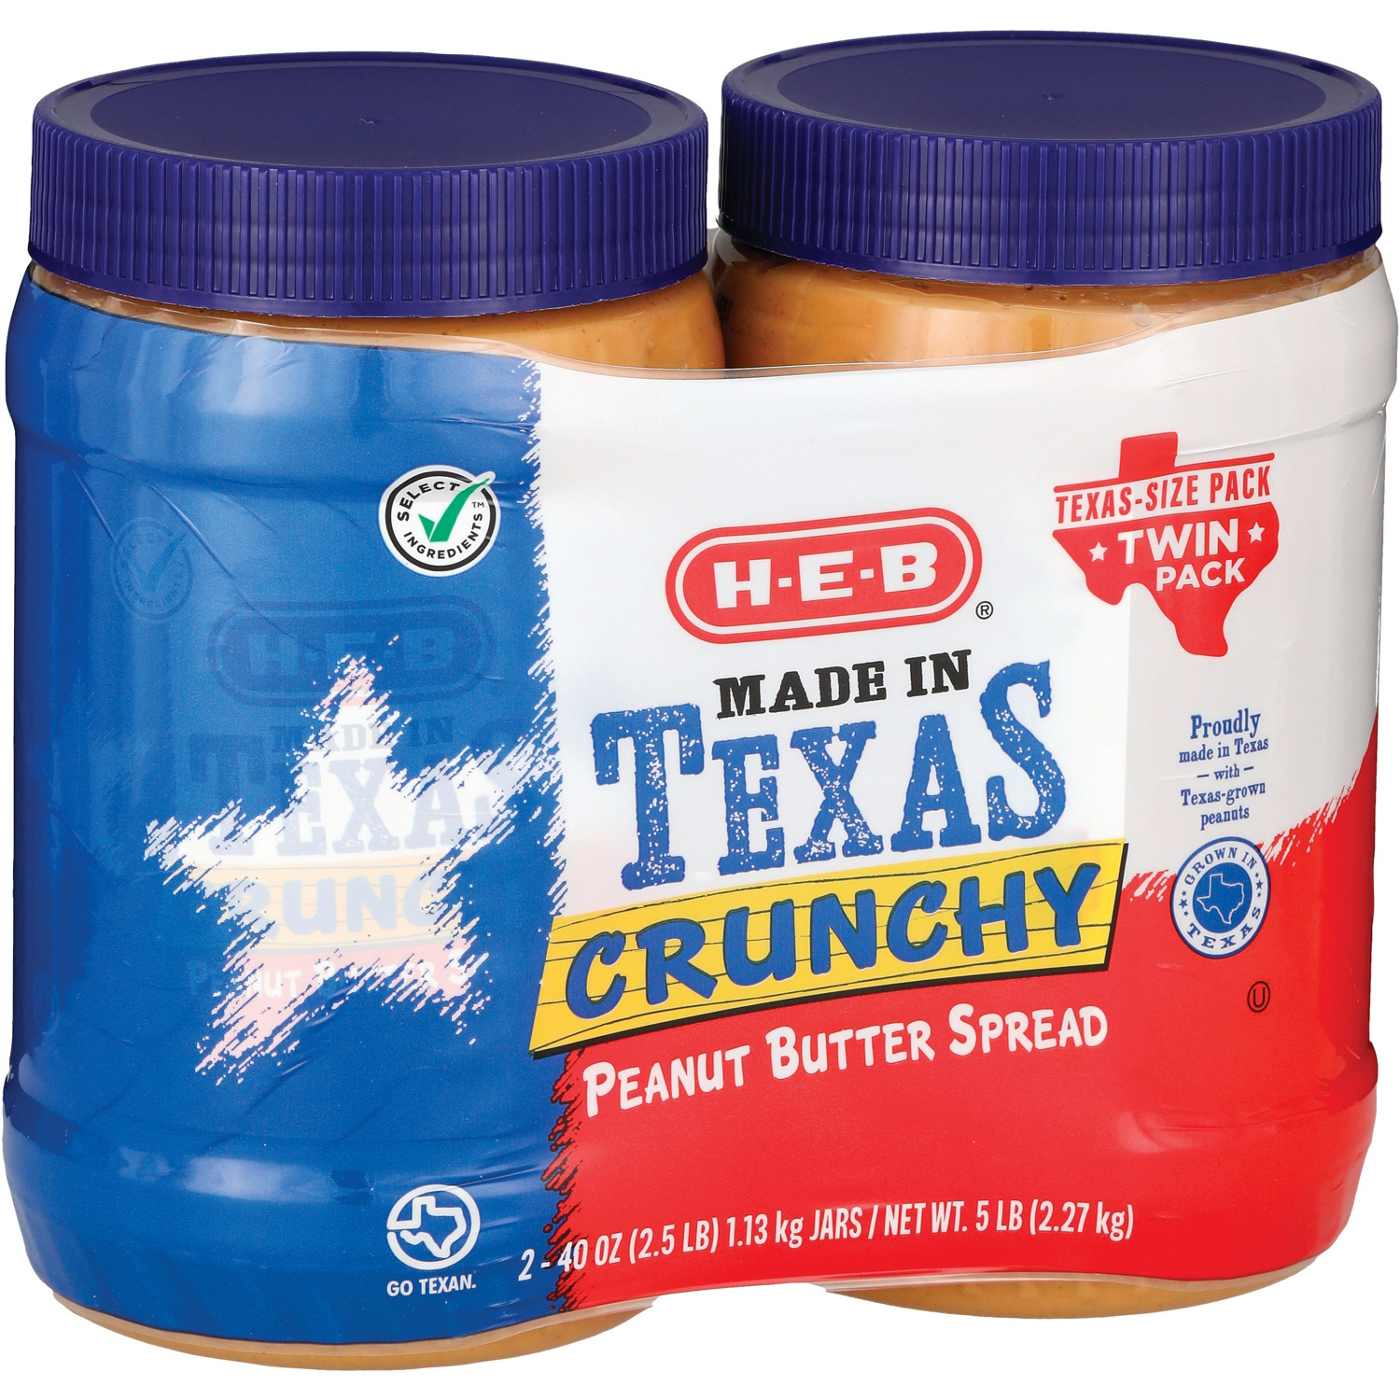 H-E-B Made in Texas Crunchy Peanut Butter – Texas-Size Pack Twin Pack; image 2 of 2